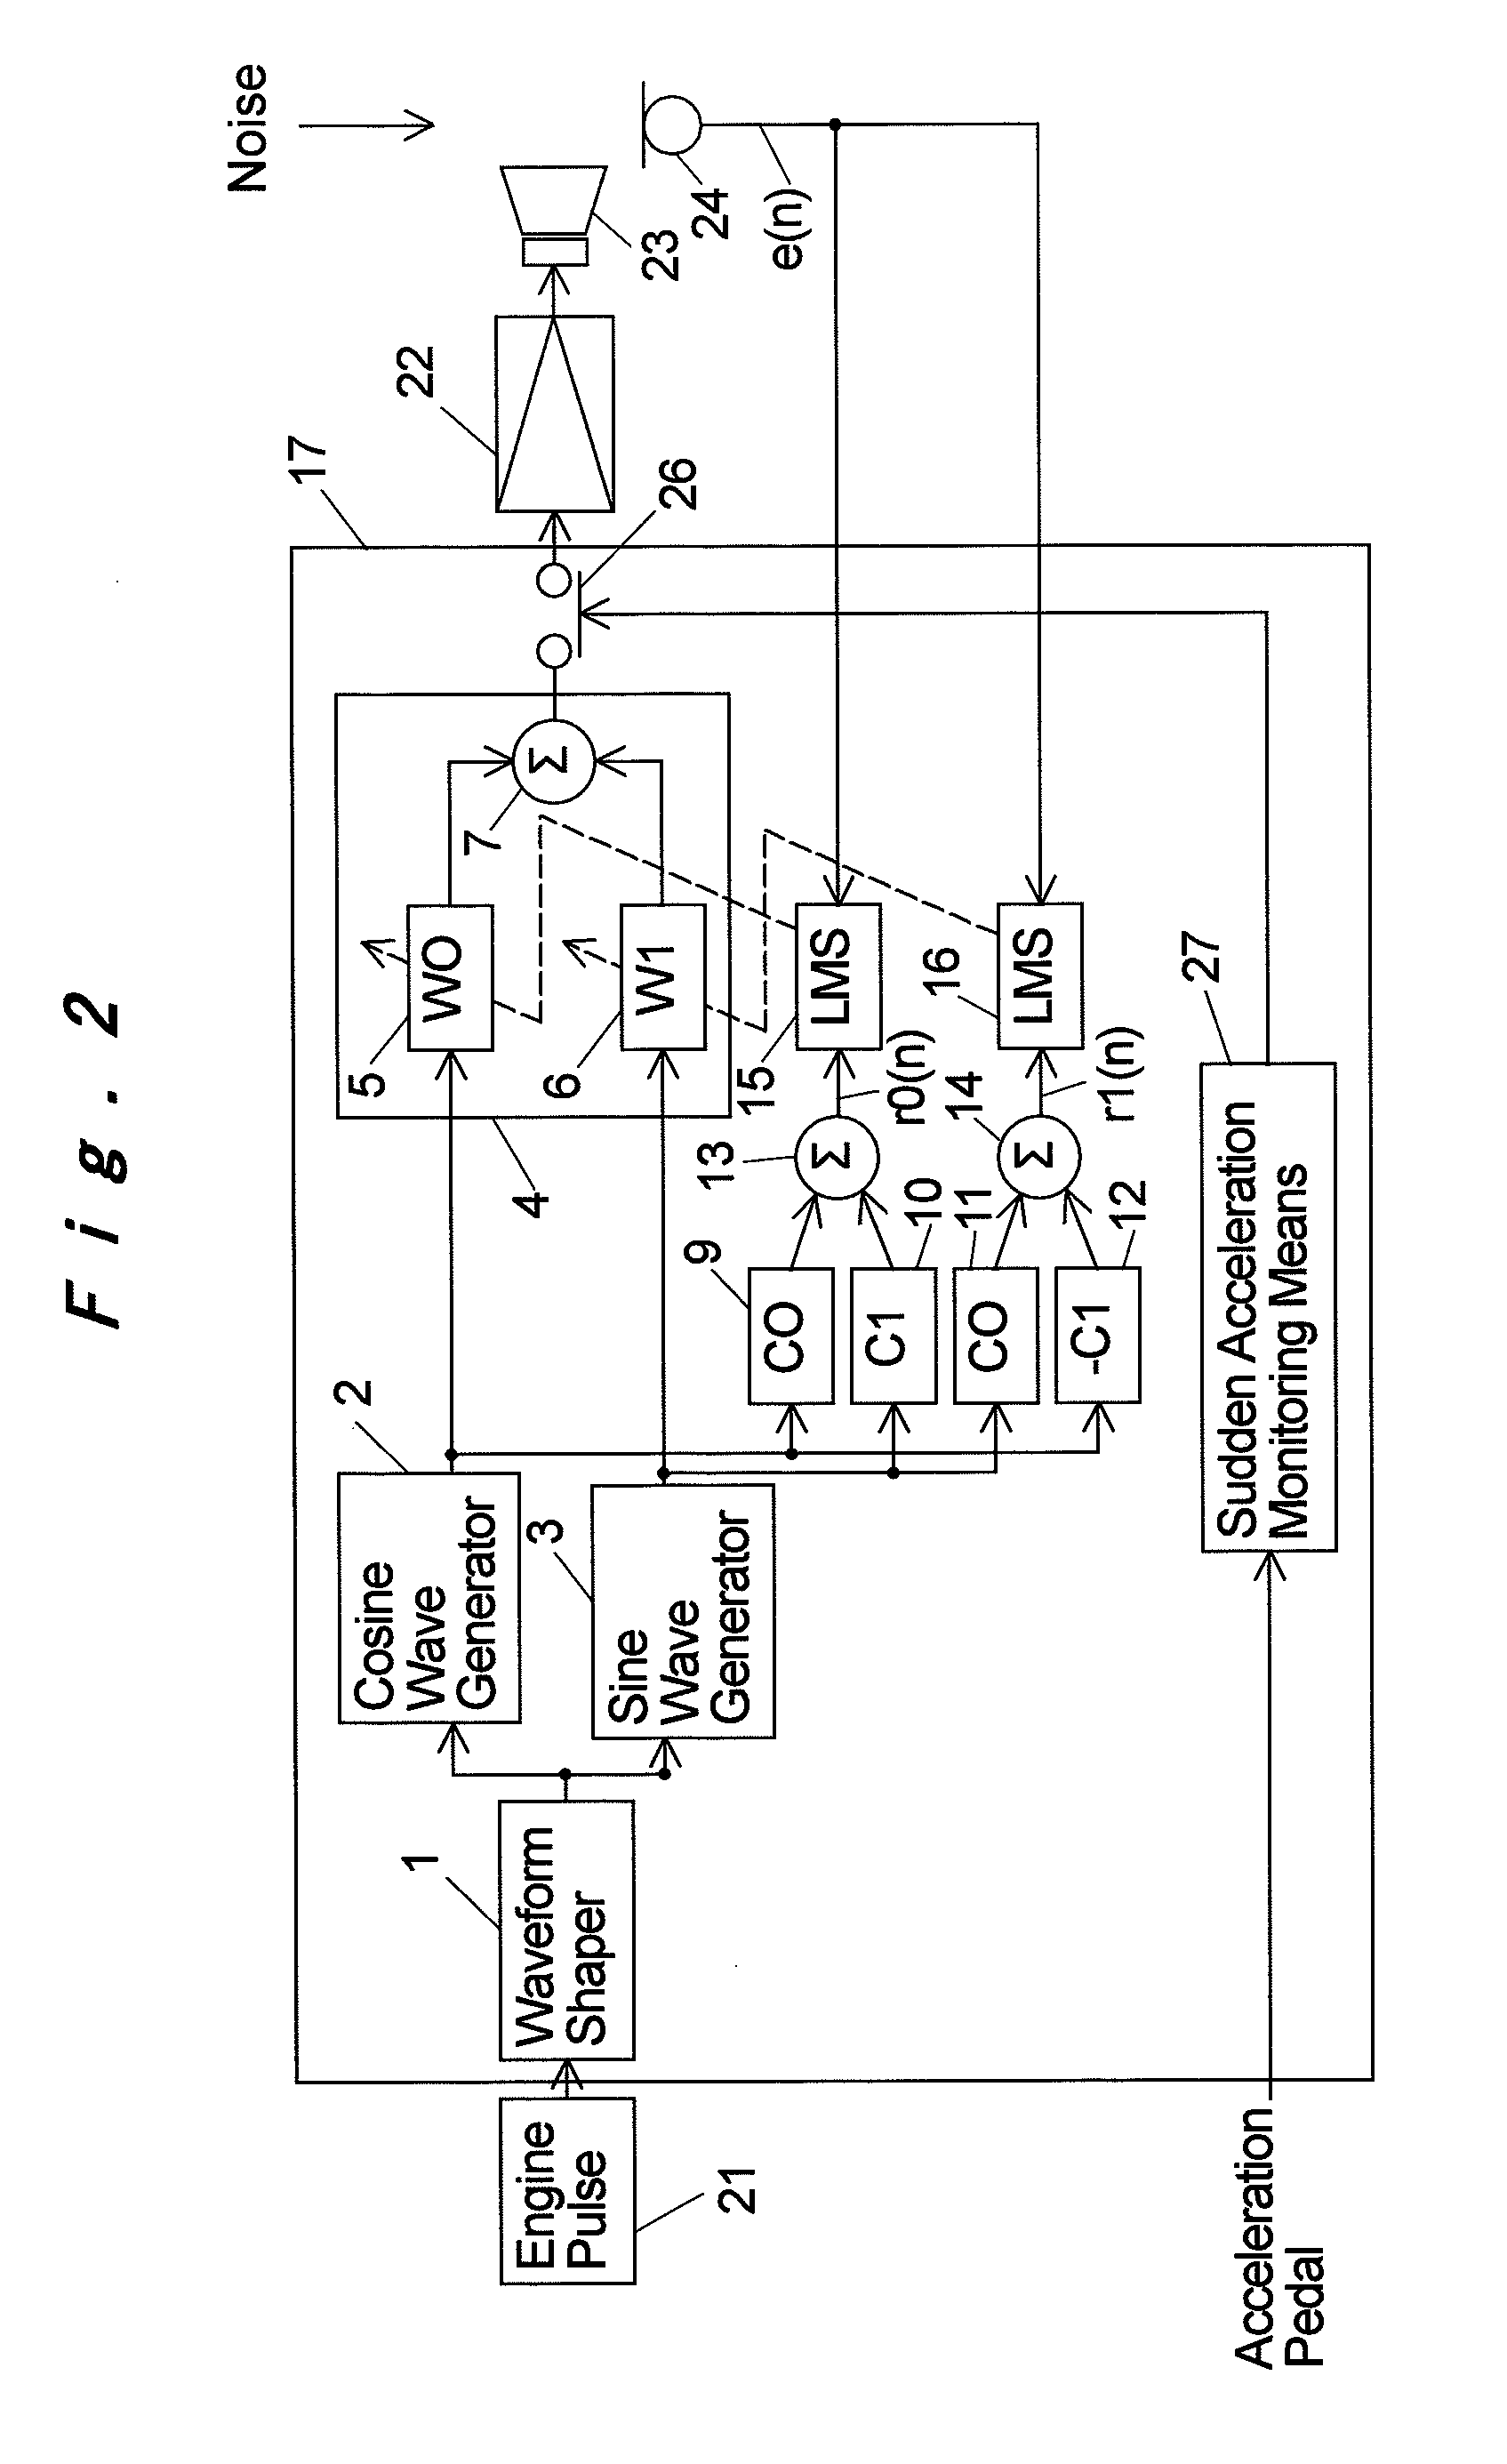 Active Noise Control System